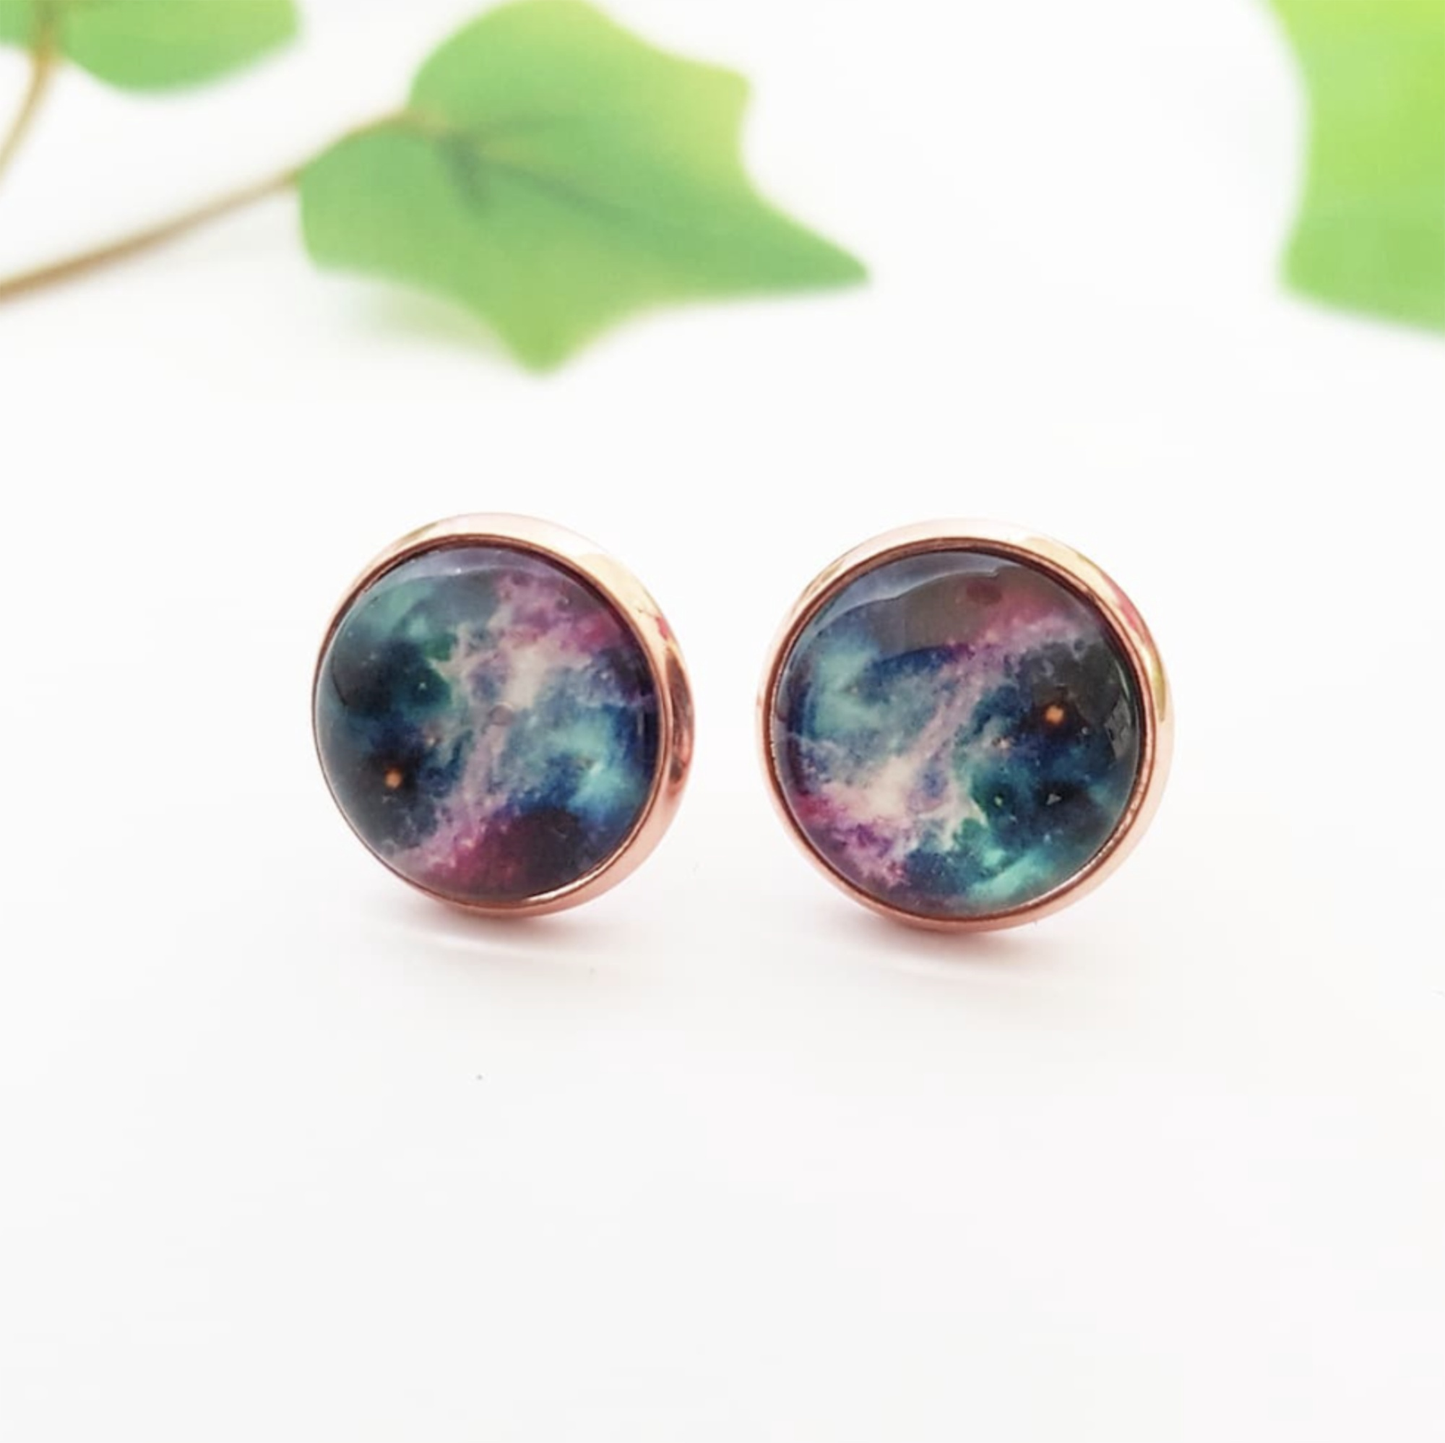 Star Galaxy Cabochon earrings - Lever back or Stud